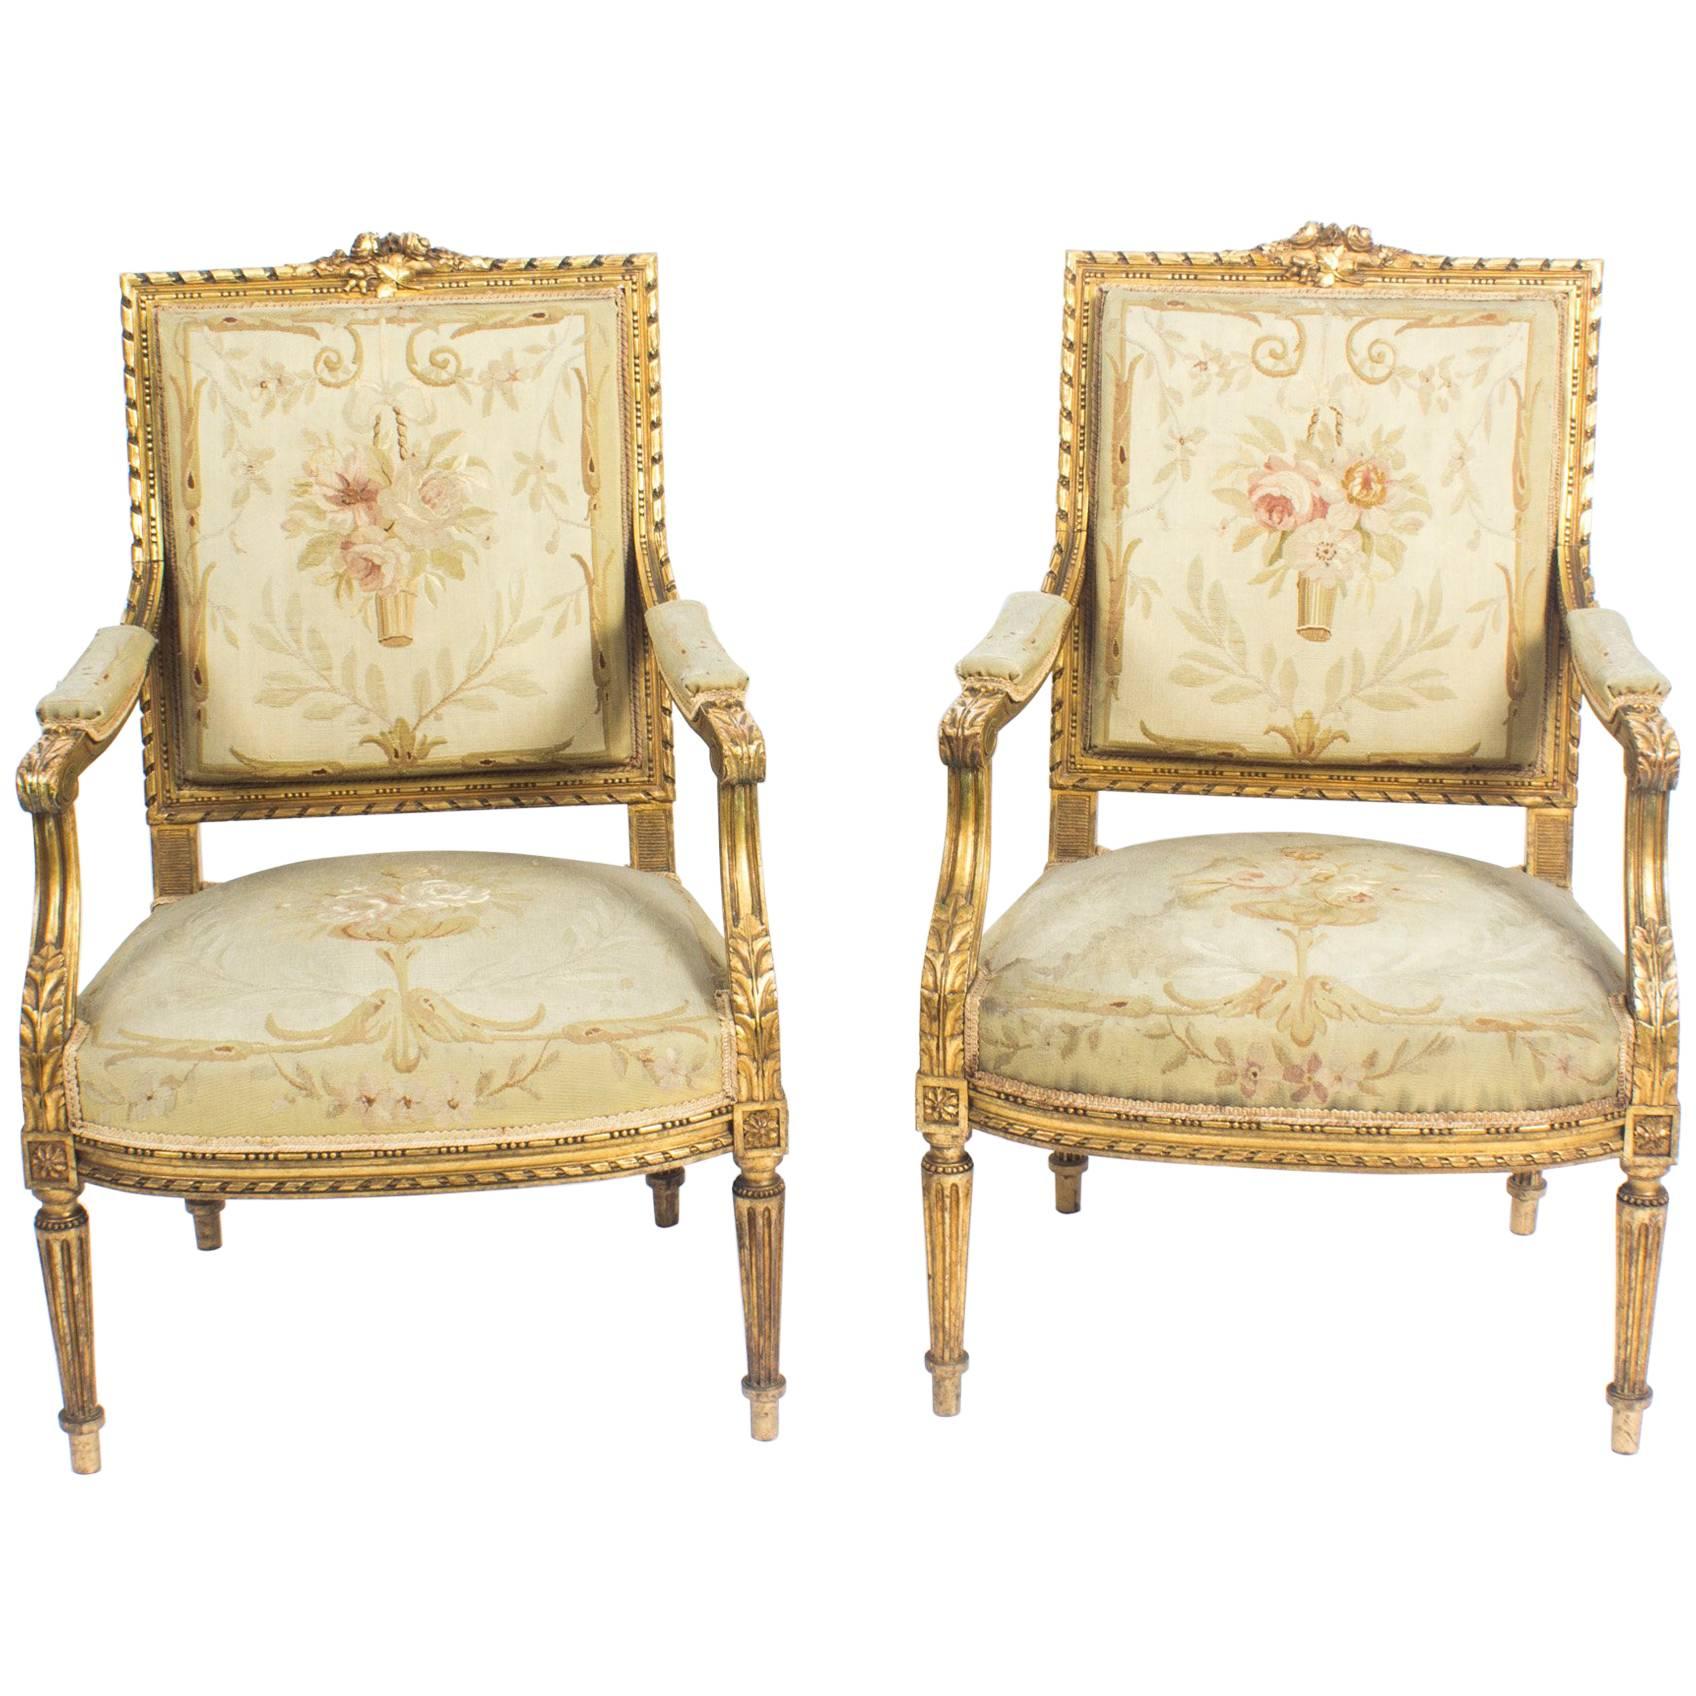 Antique Pair of Louis XVI Style Giltwood Armchairs, Late 19th Century